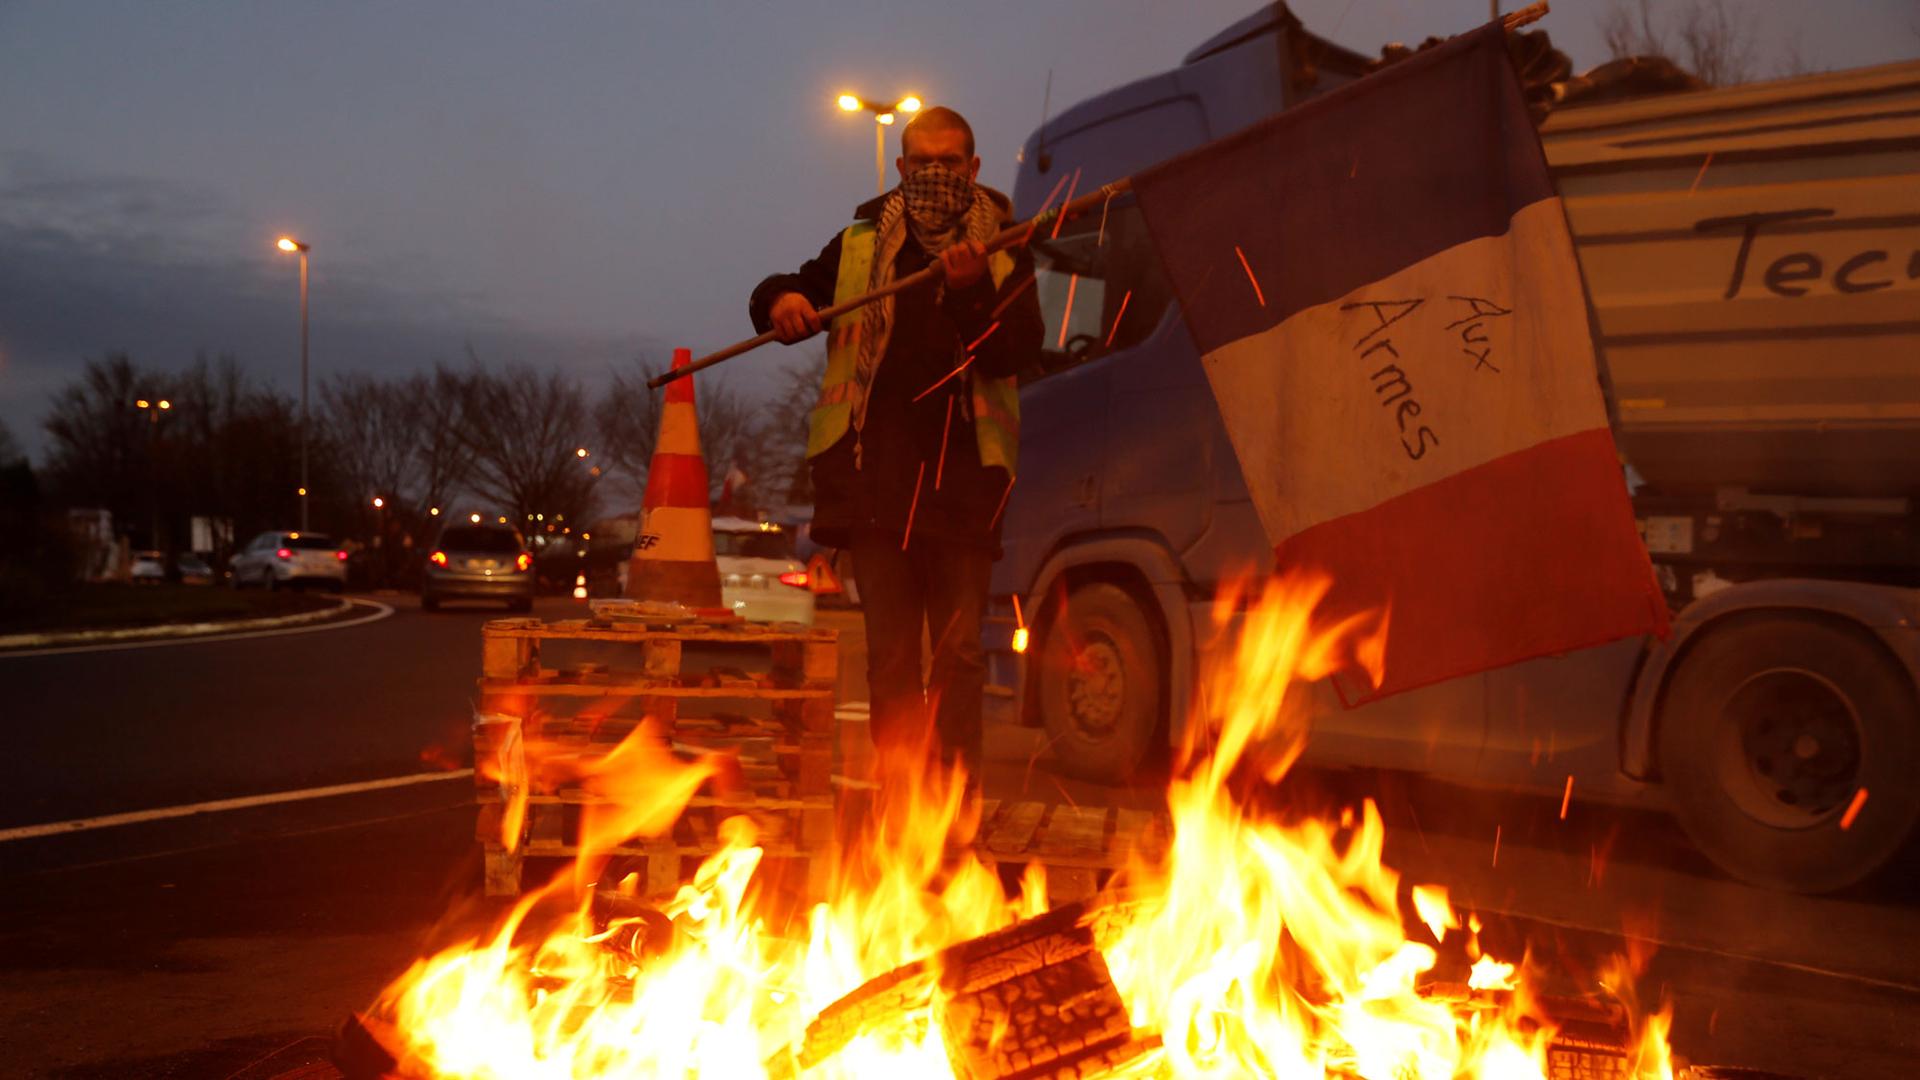 A protester wearing a yellow vest is shown holding a flag near burning debris at the approach to the A2 Paris-Brussels highway, Dec. 4, 2018.